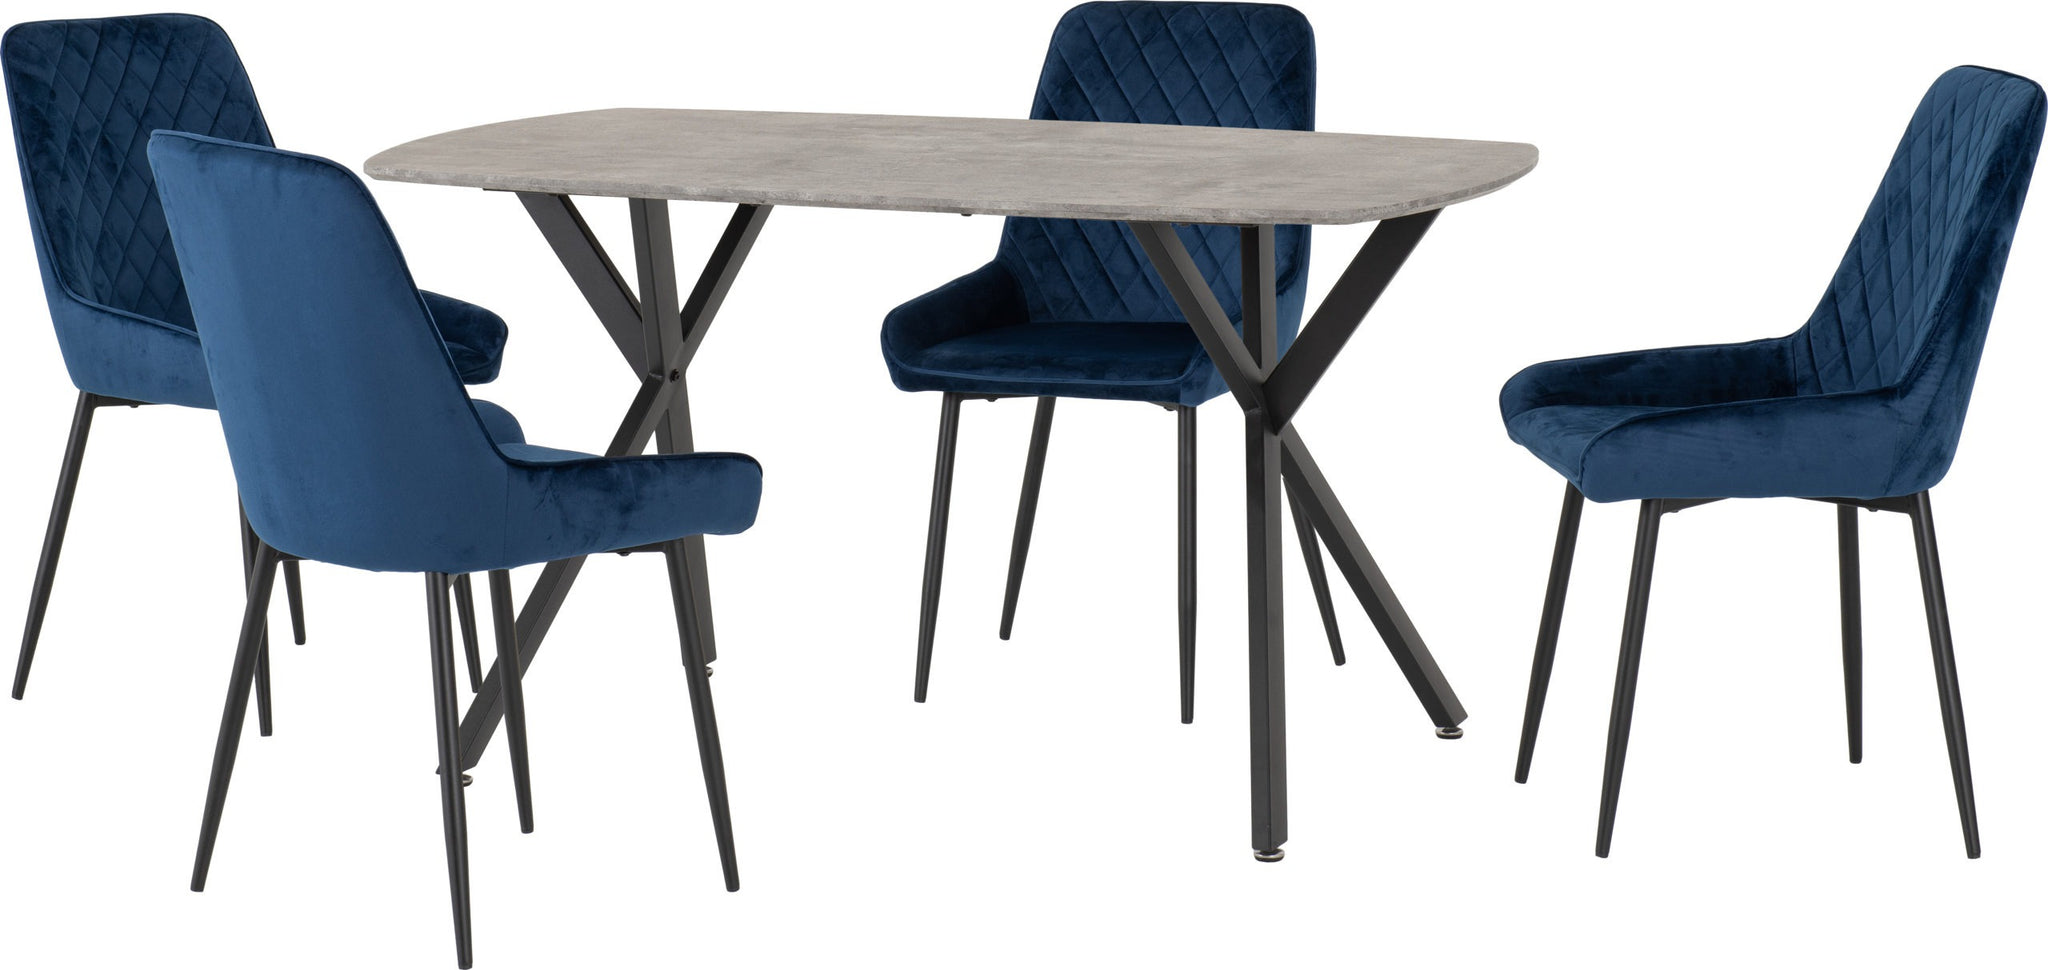 Athens Rectangular Dining Set with Avery Chairs - Concrete Effect/Black/Sapphire Blue Velvet- The Right Buy Store